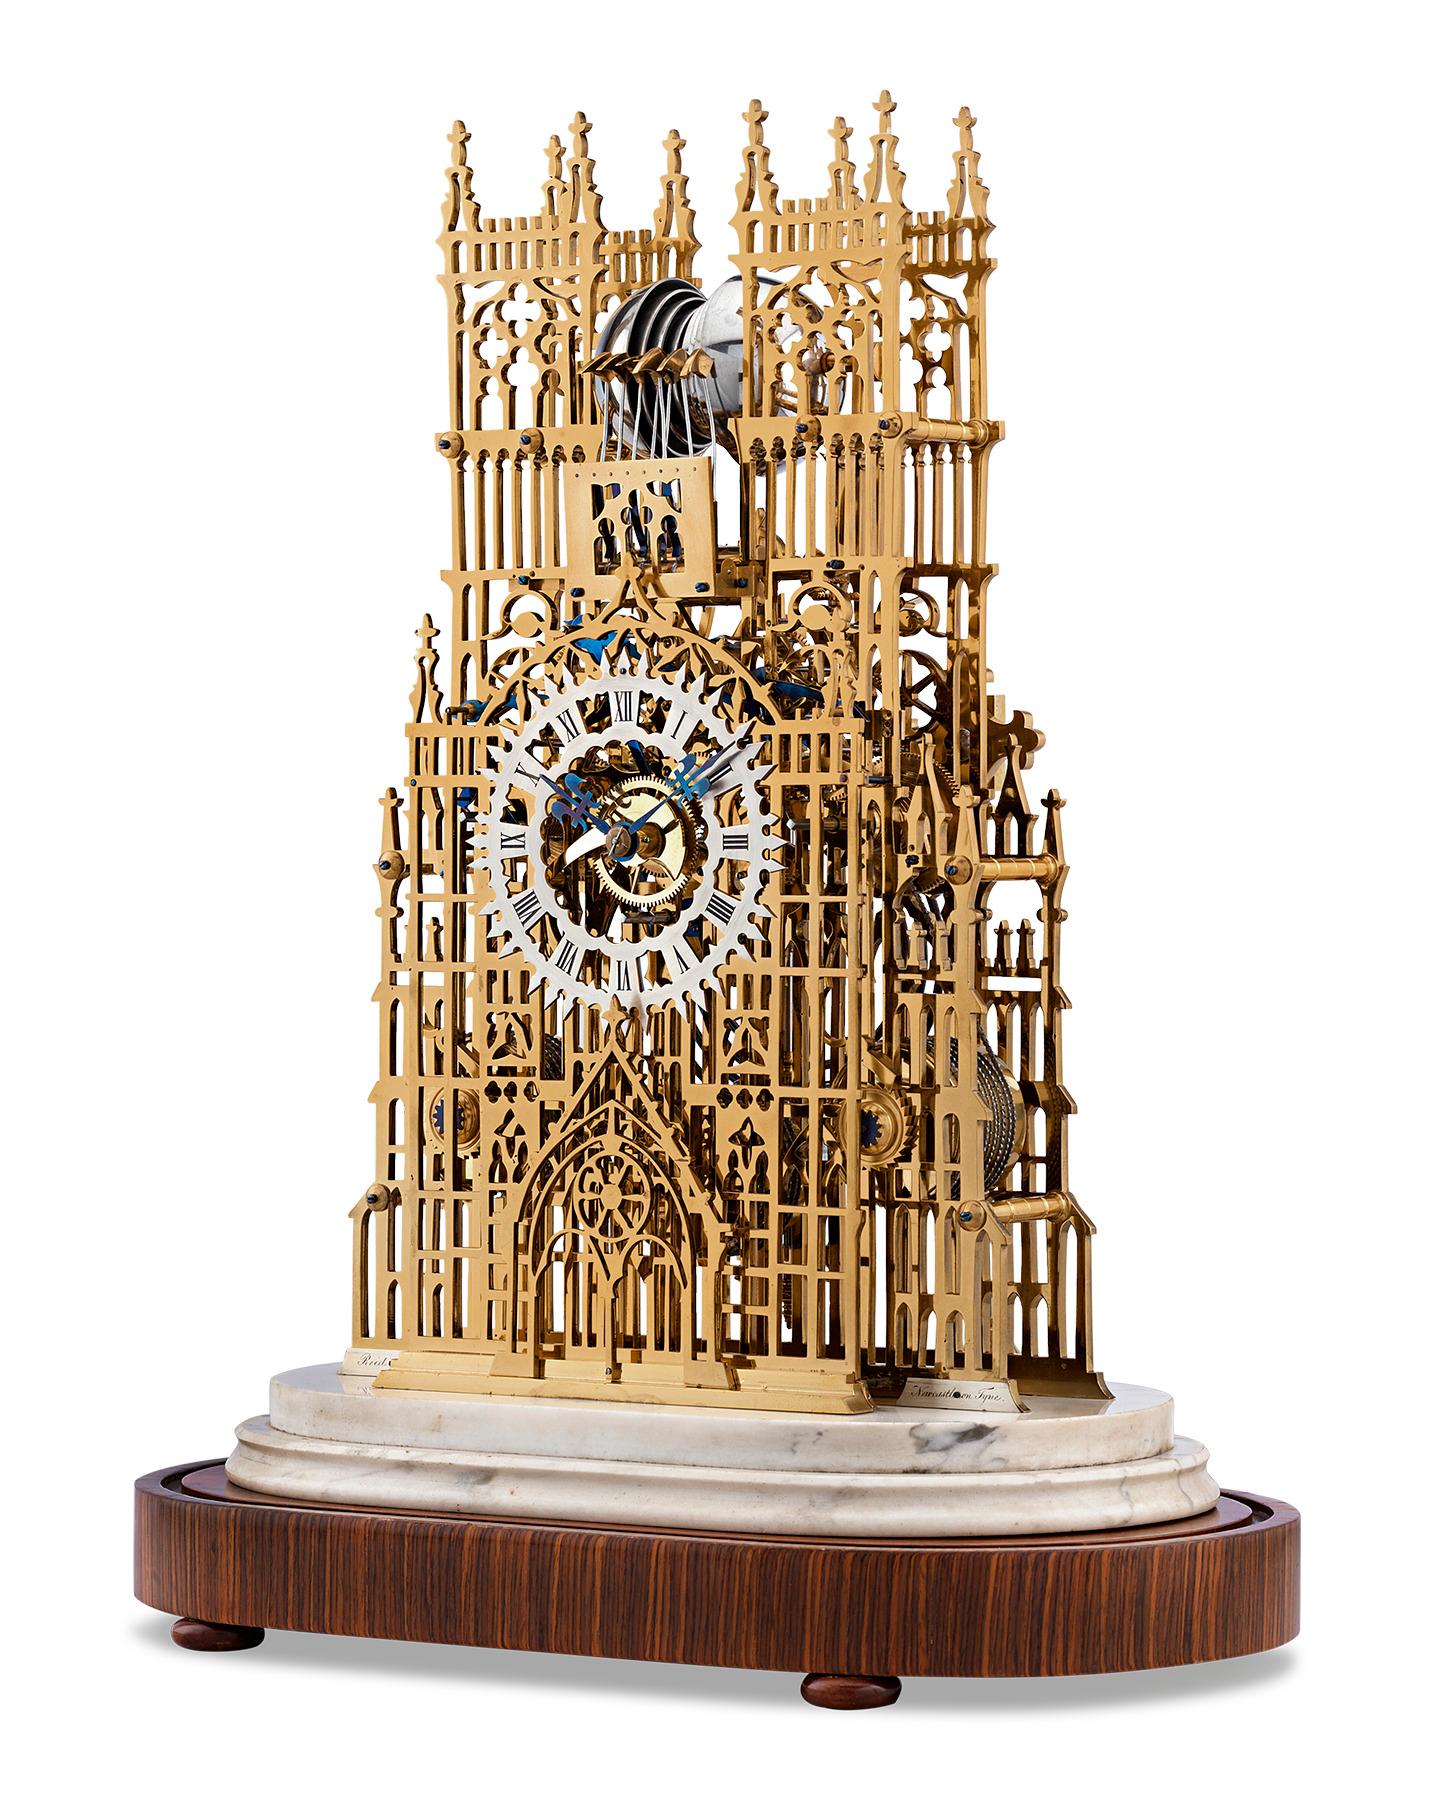 A faithful rendition of London's iconic Westminster Abbey, this magnificent bronze skeleton clock is a work of true horological mastery. Crafted by Evans of Handsworth, the timepiece represents the height of this famed clockmaster's skill. One of